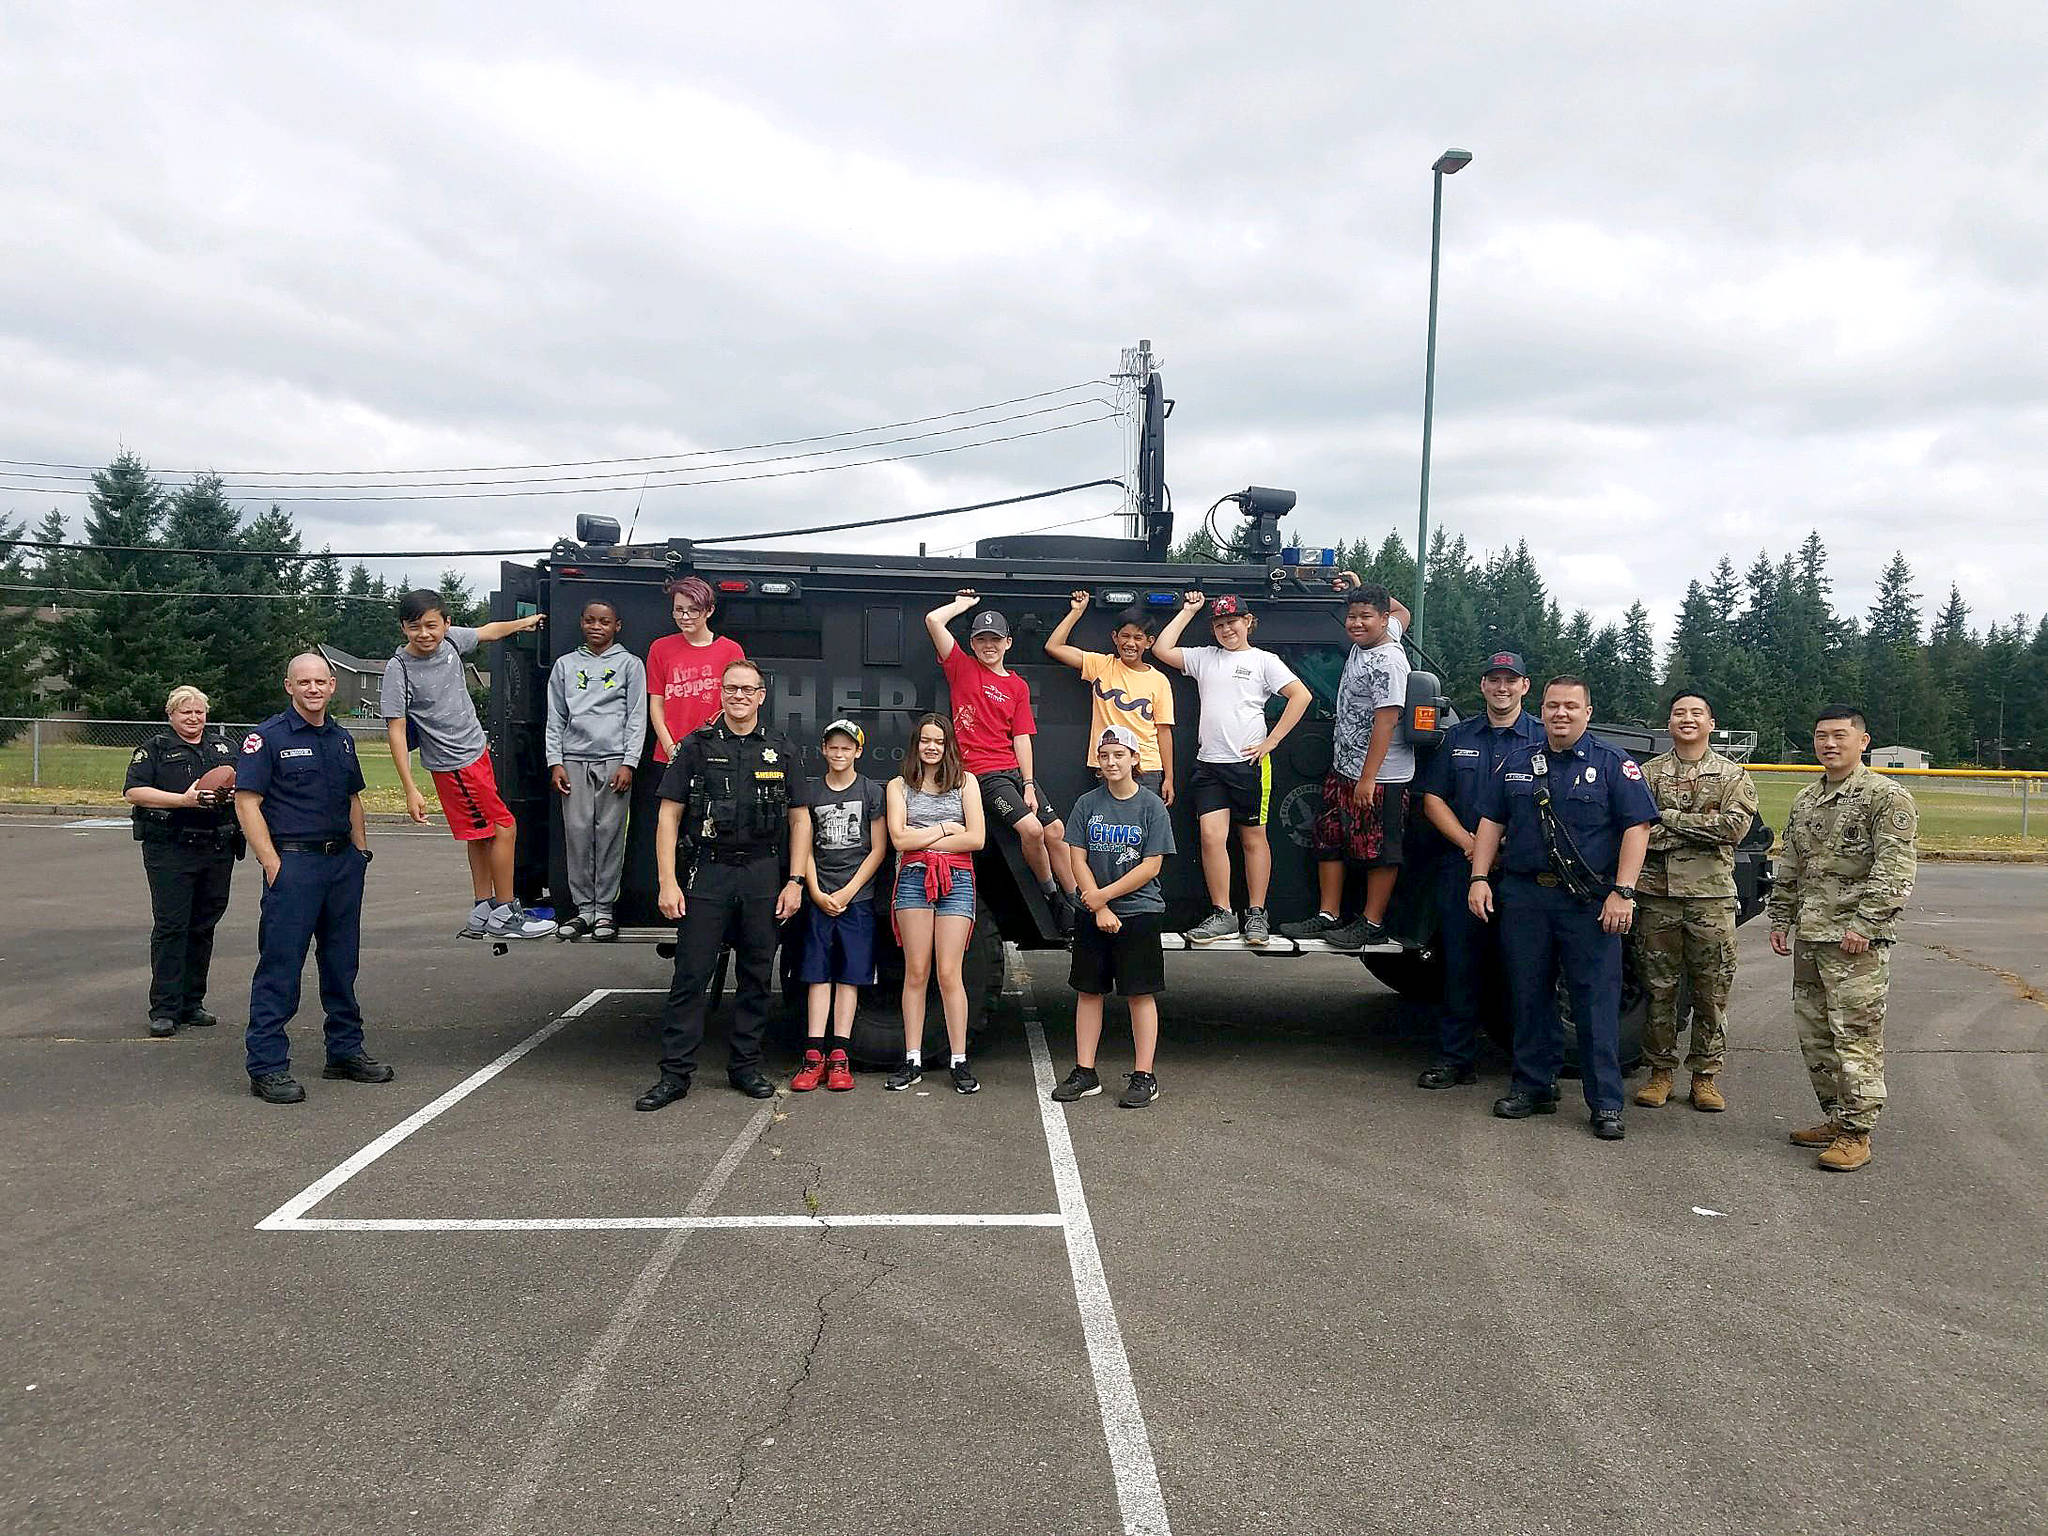 Photos by Danielle Chastaine.                                  Students in the Barbells and Badges summer camp at Cedar Heights Middle School compete on team firefighter or team police on Friday, Aug. 9. Photo courtesy of the Covington Police Department.